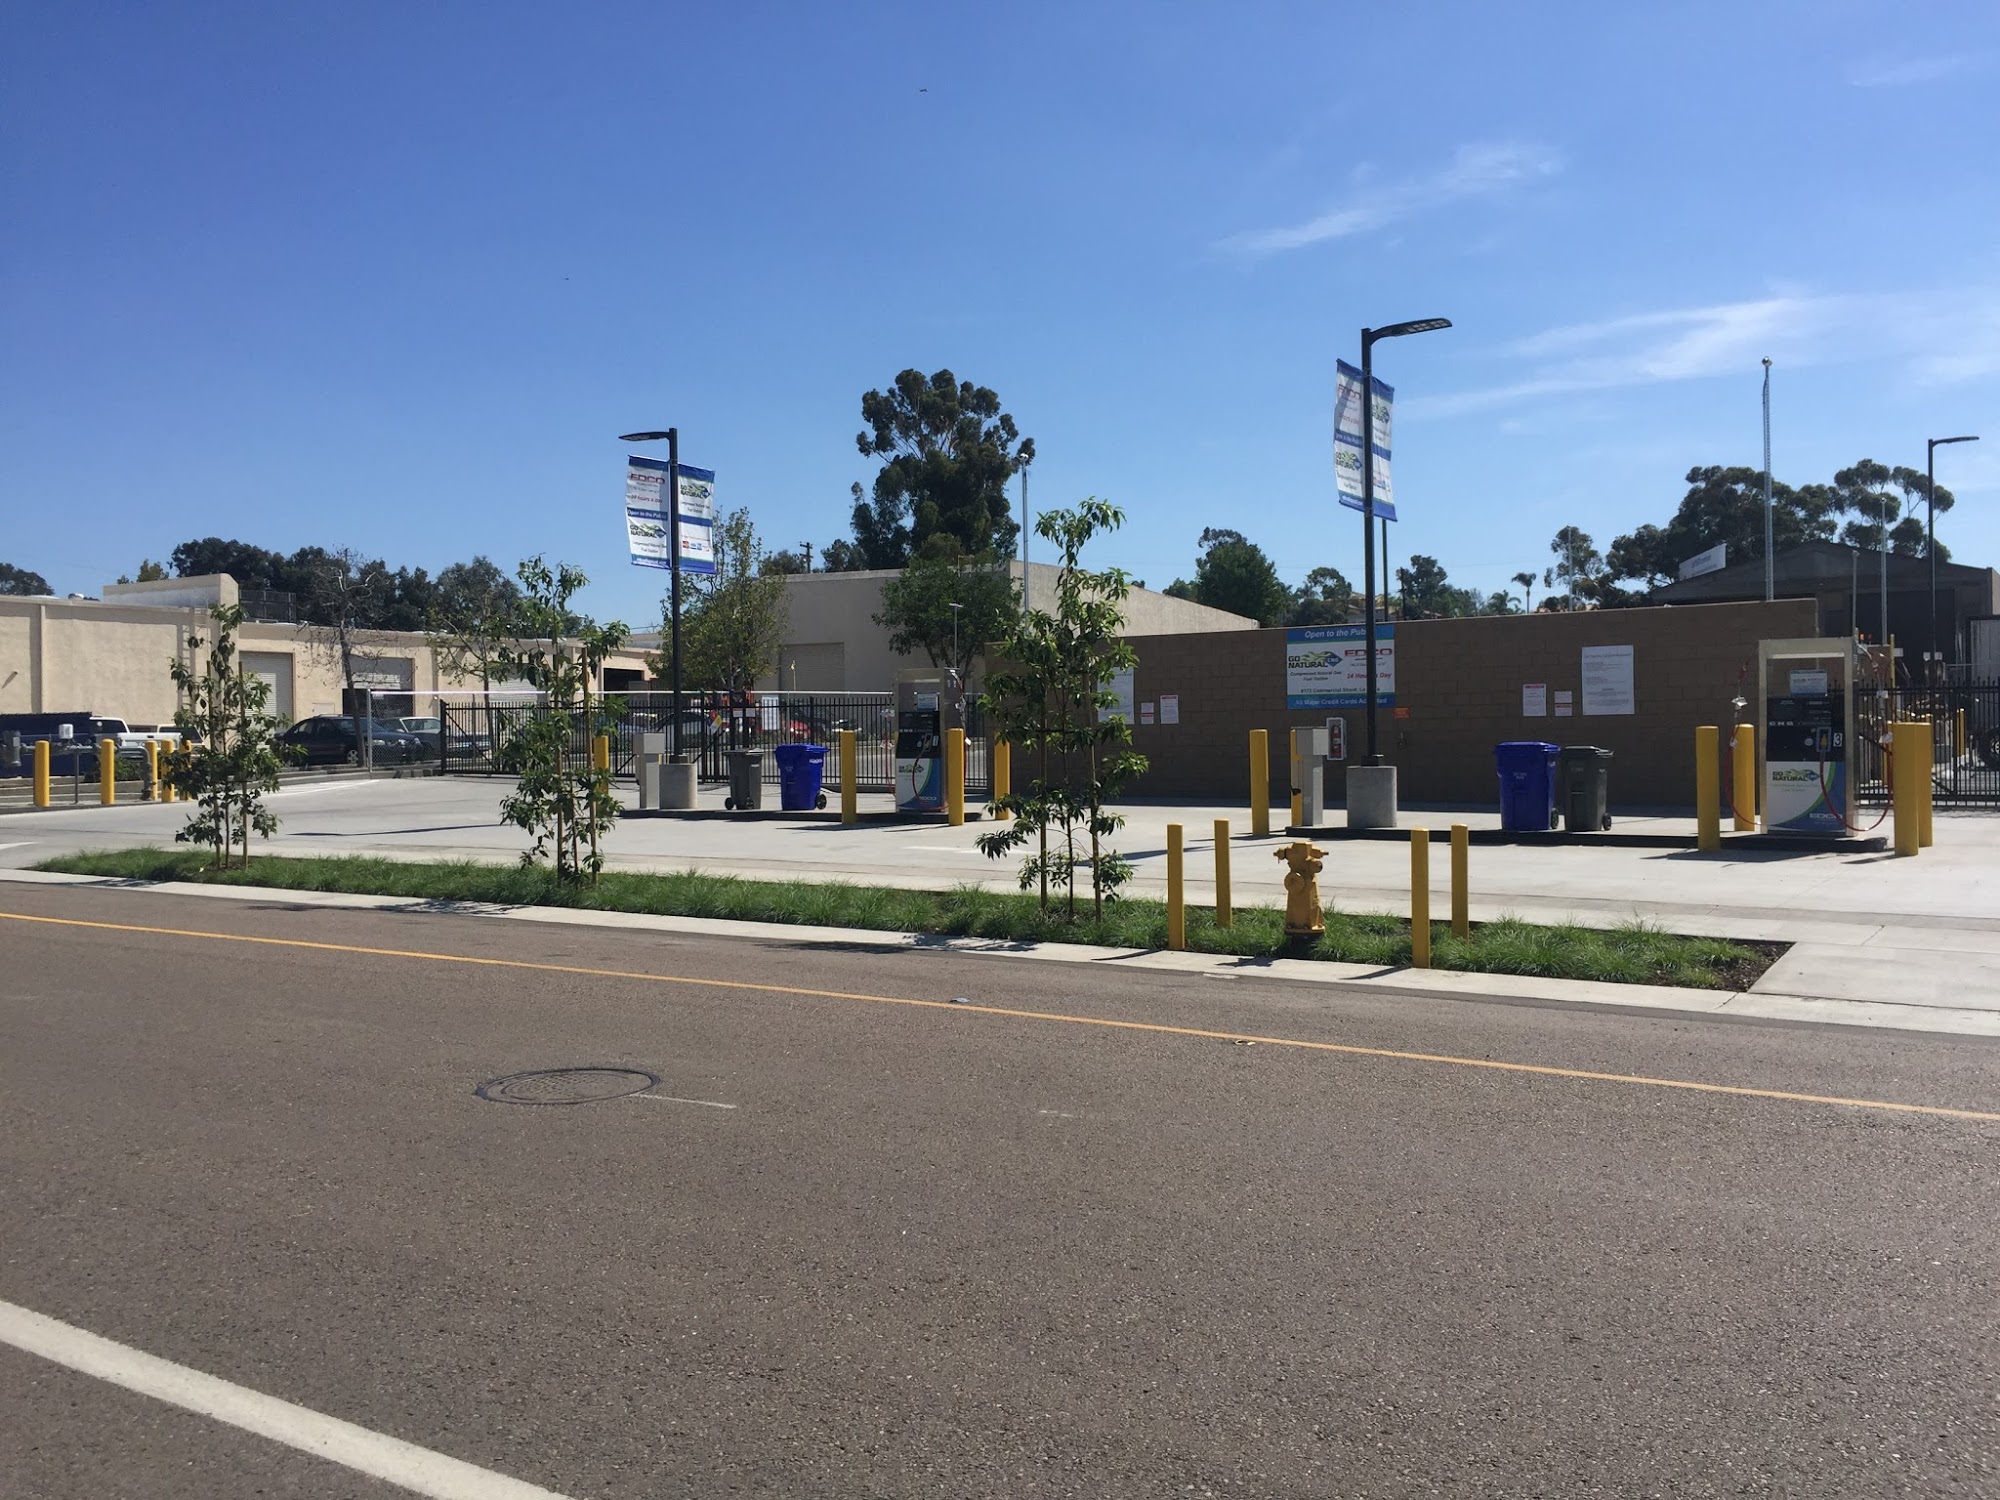 EDCO Public CNG Station (hours apply to CNG fueling station only)